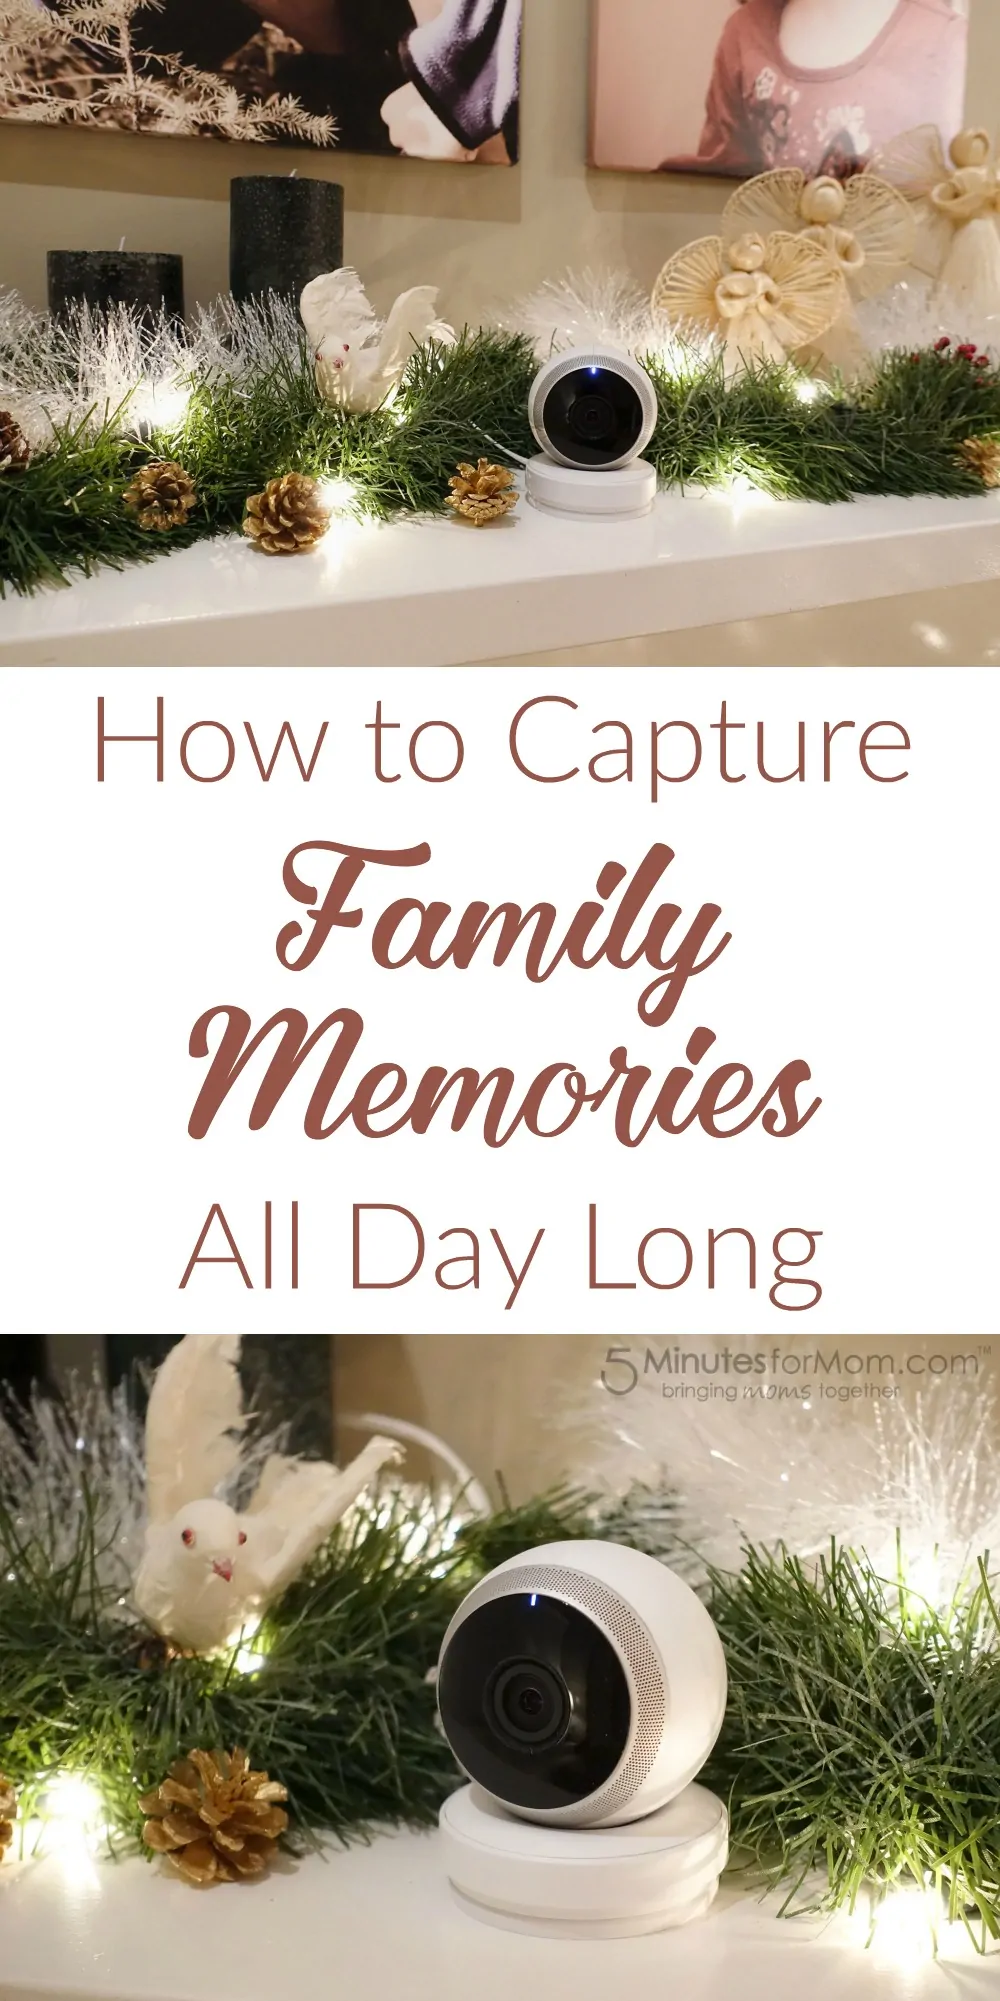 How to Capture Family Memories All Day Long